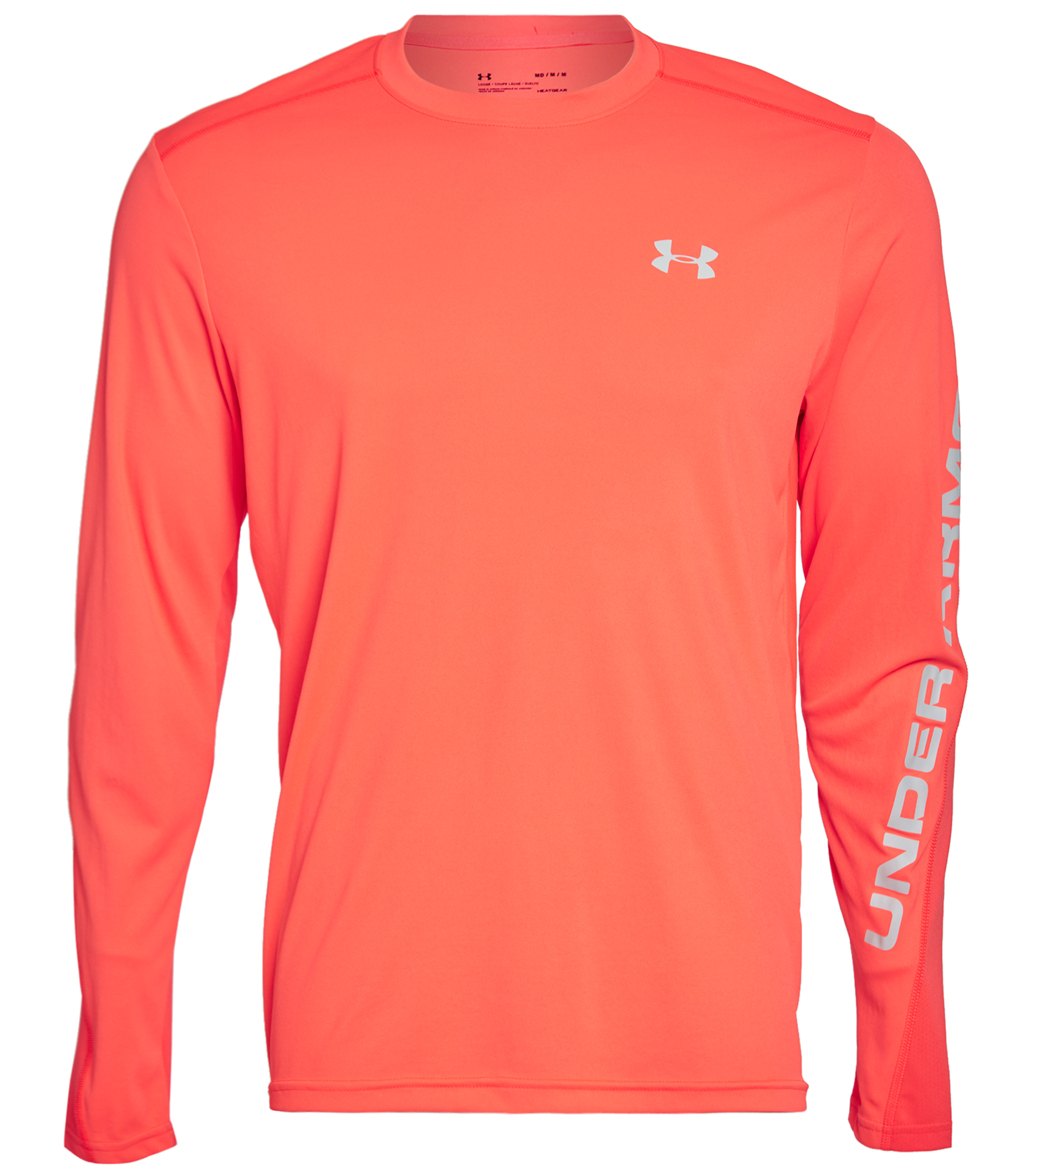 under armour swimming shirt